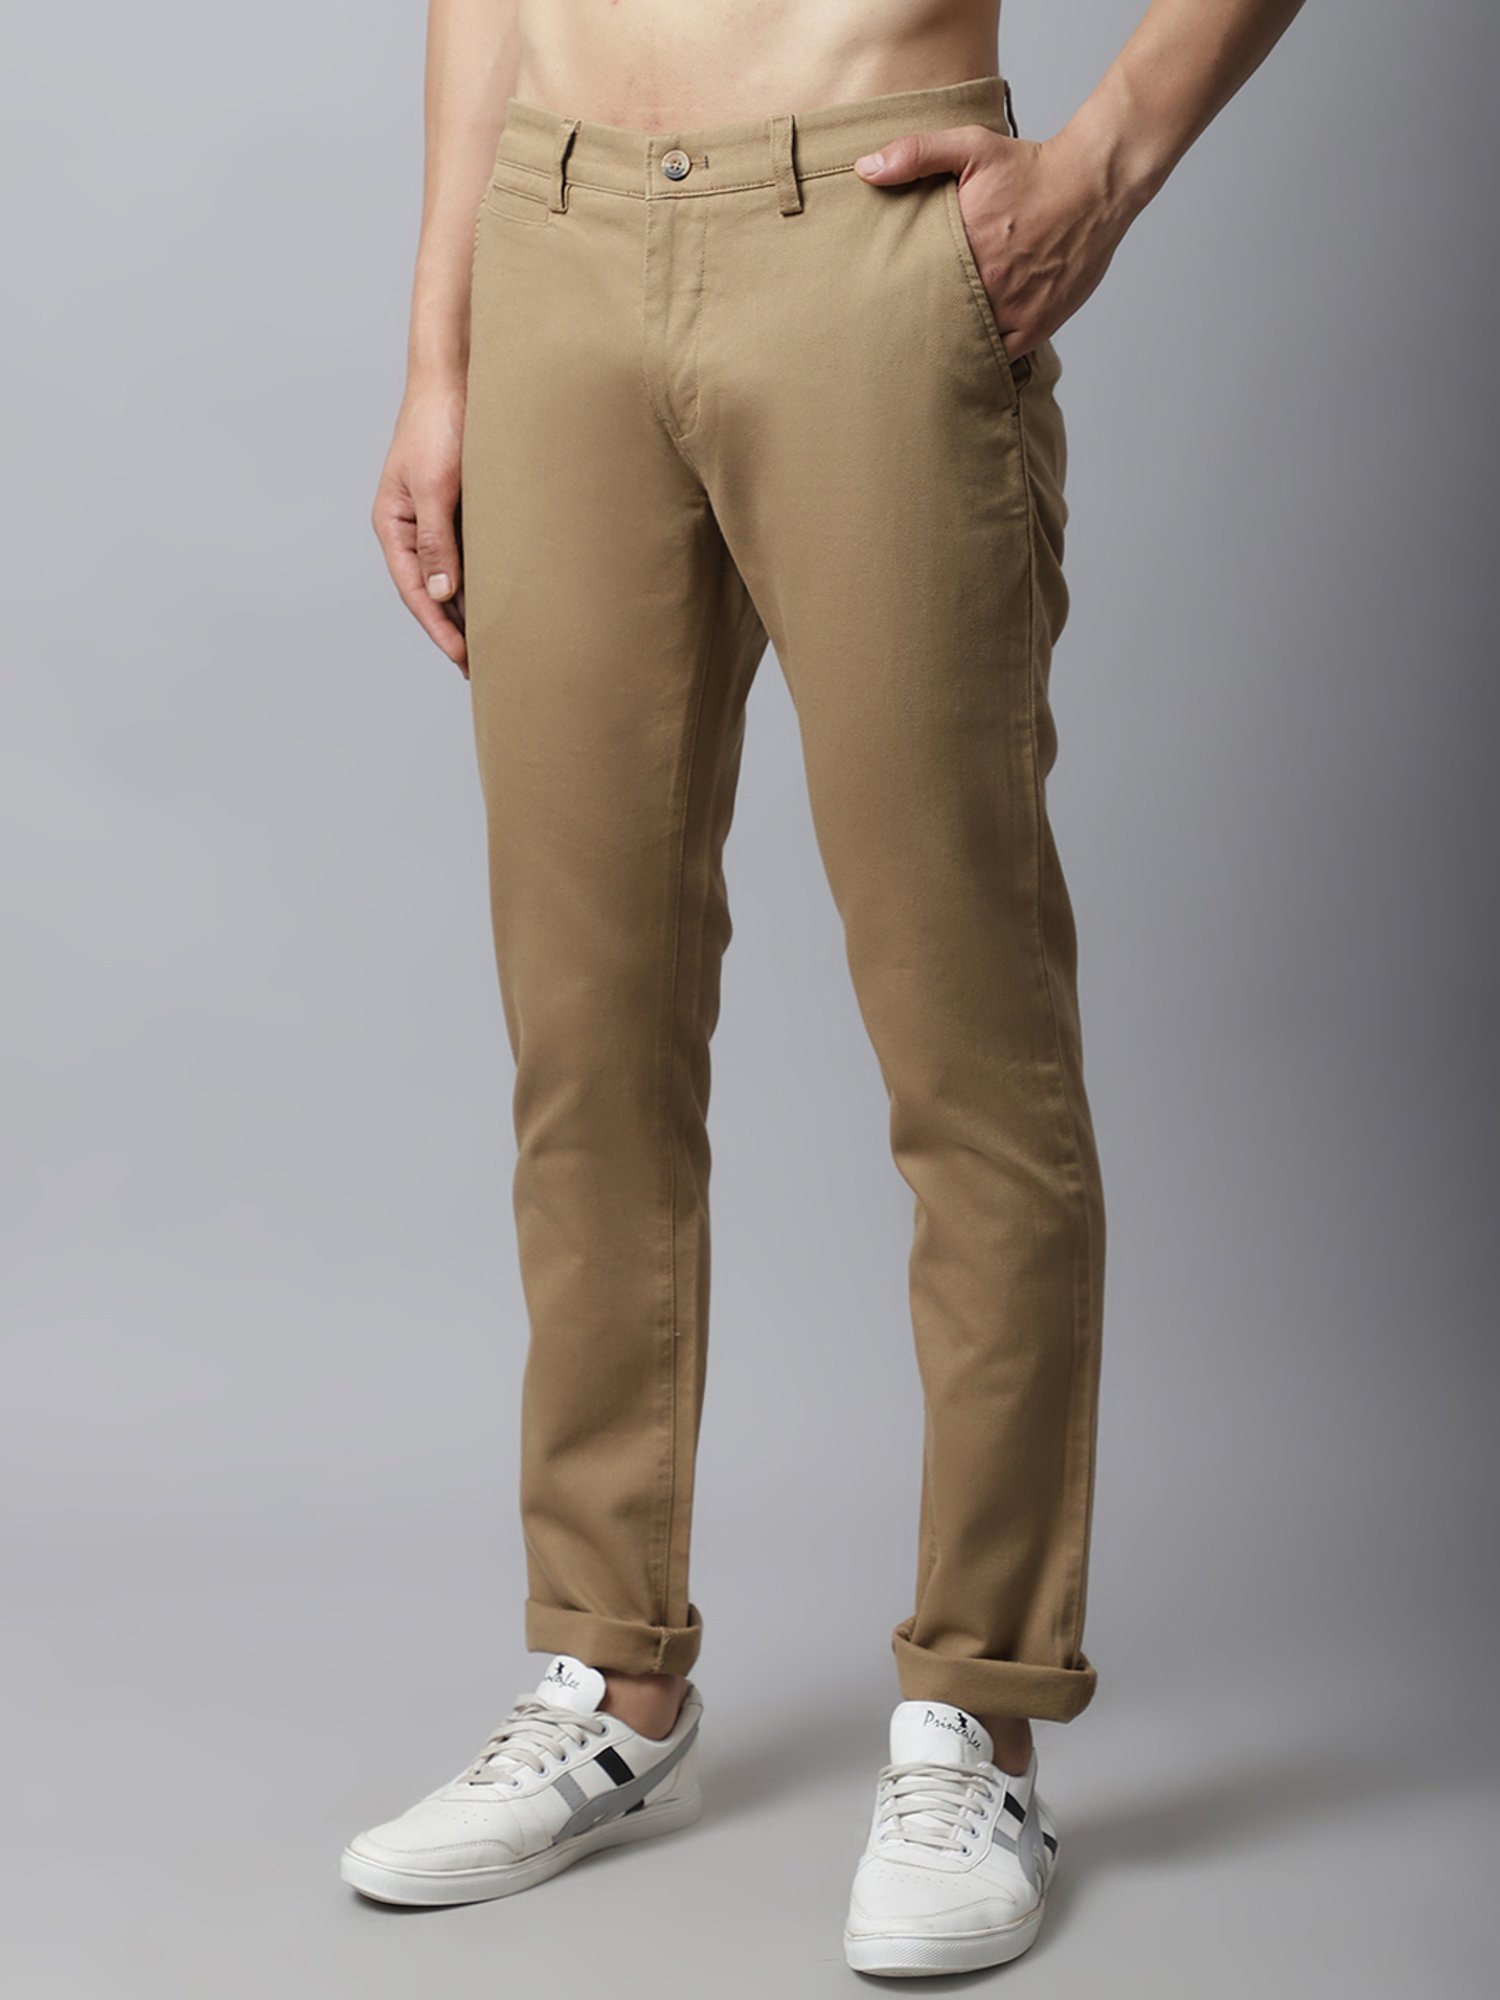 Buy Brown Solid Cotton Stretch Chino Pant for Men Online India  tbase